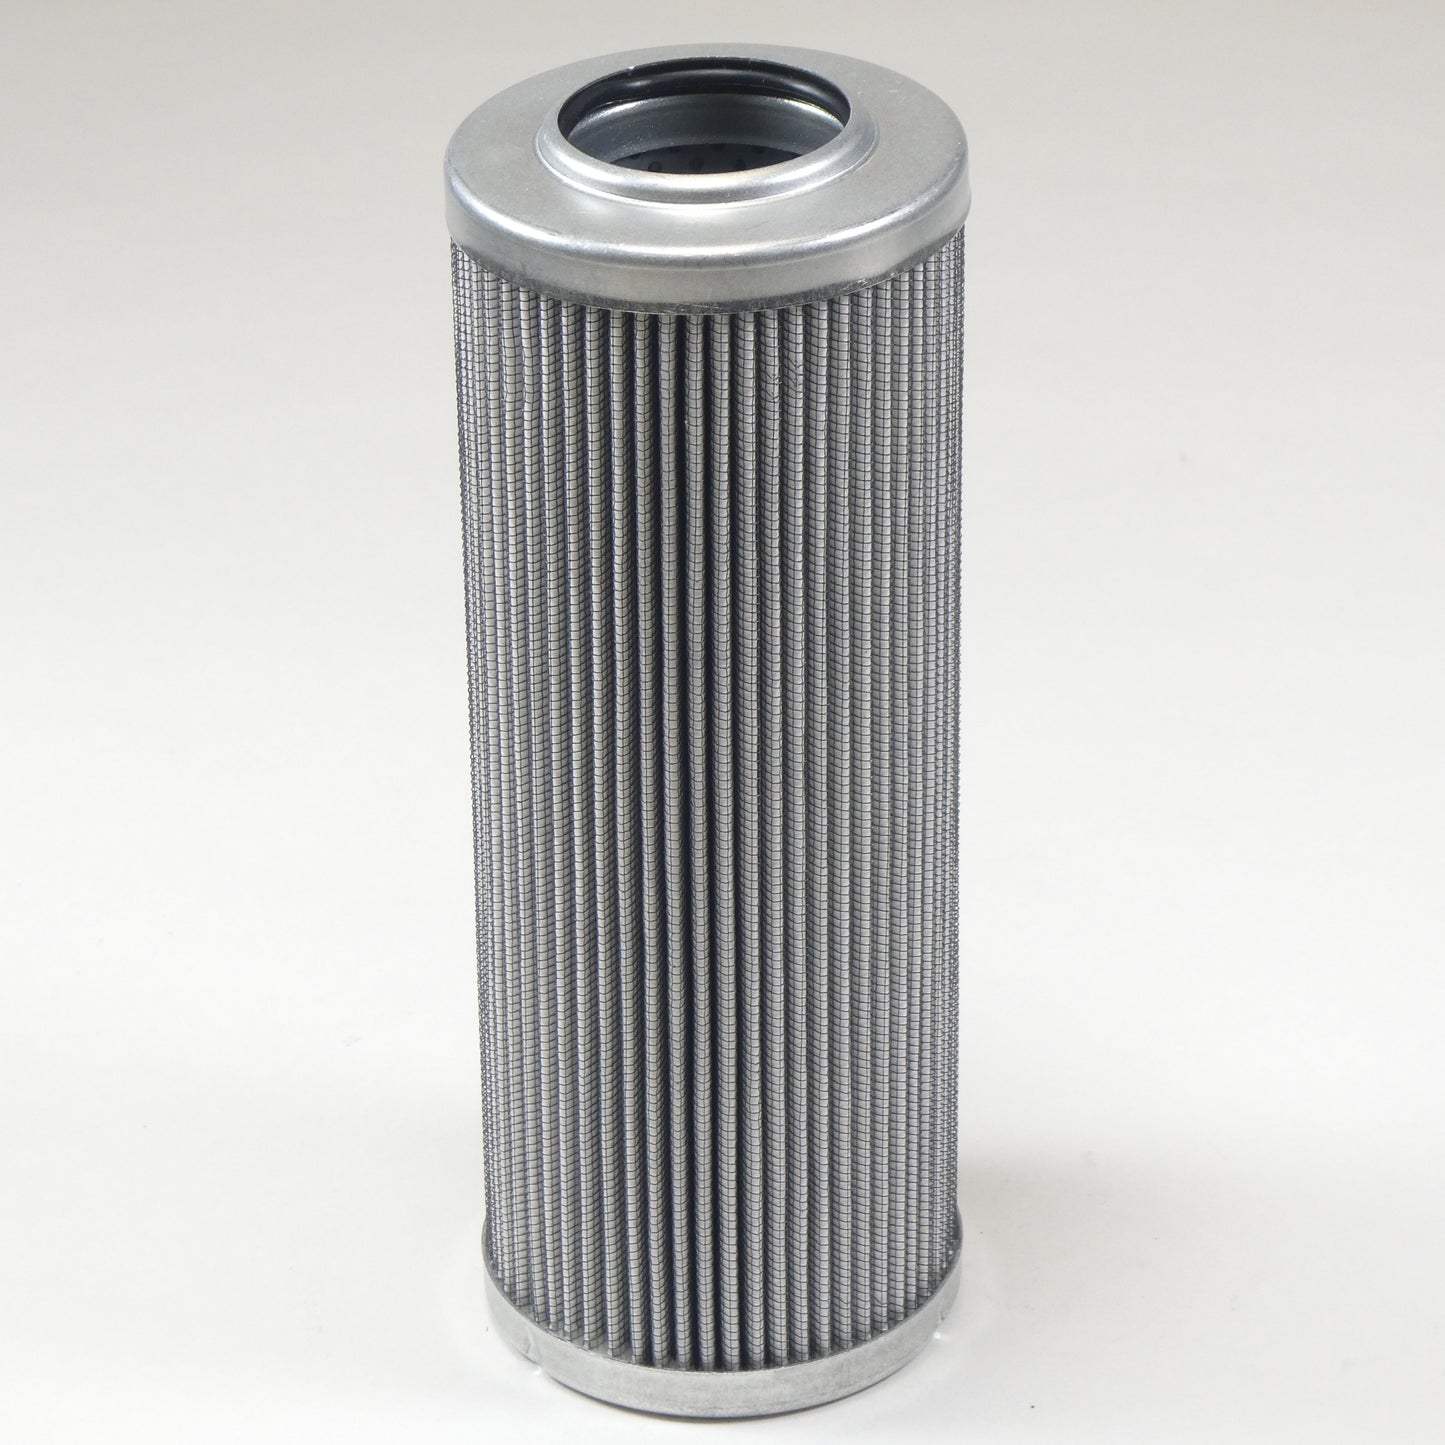 Hydrafil Replacement Filter Element for Hilco 3830-11-006-C